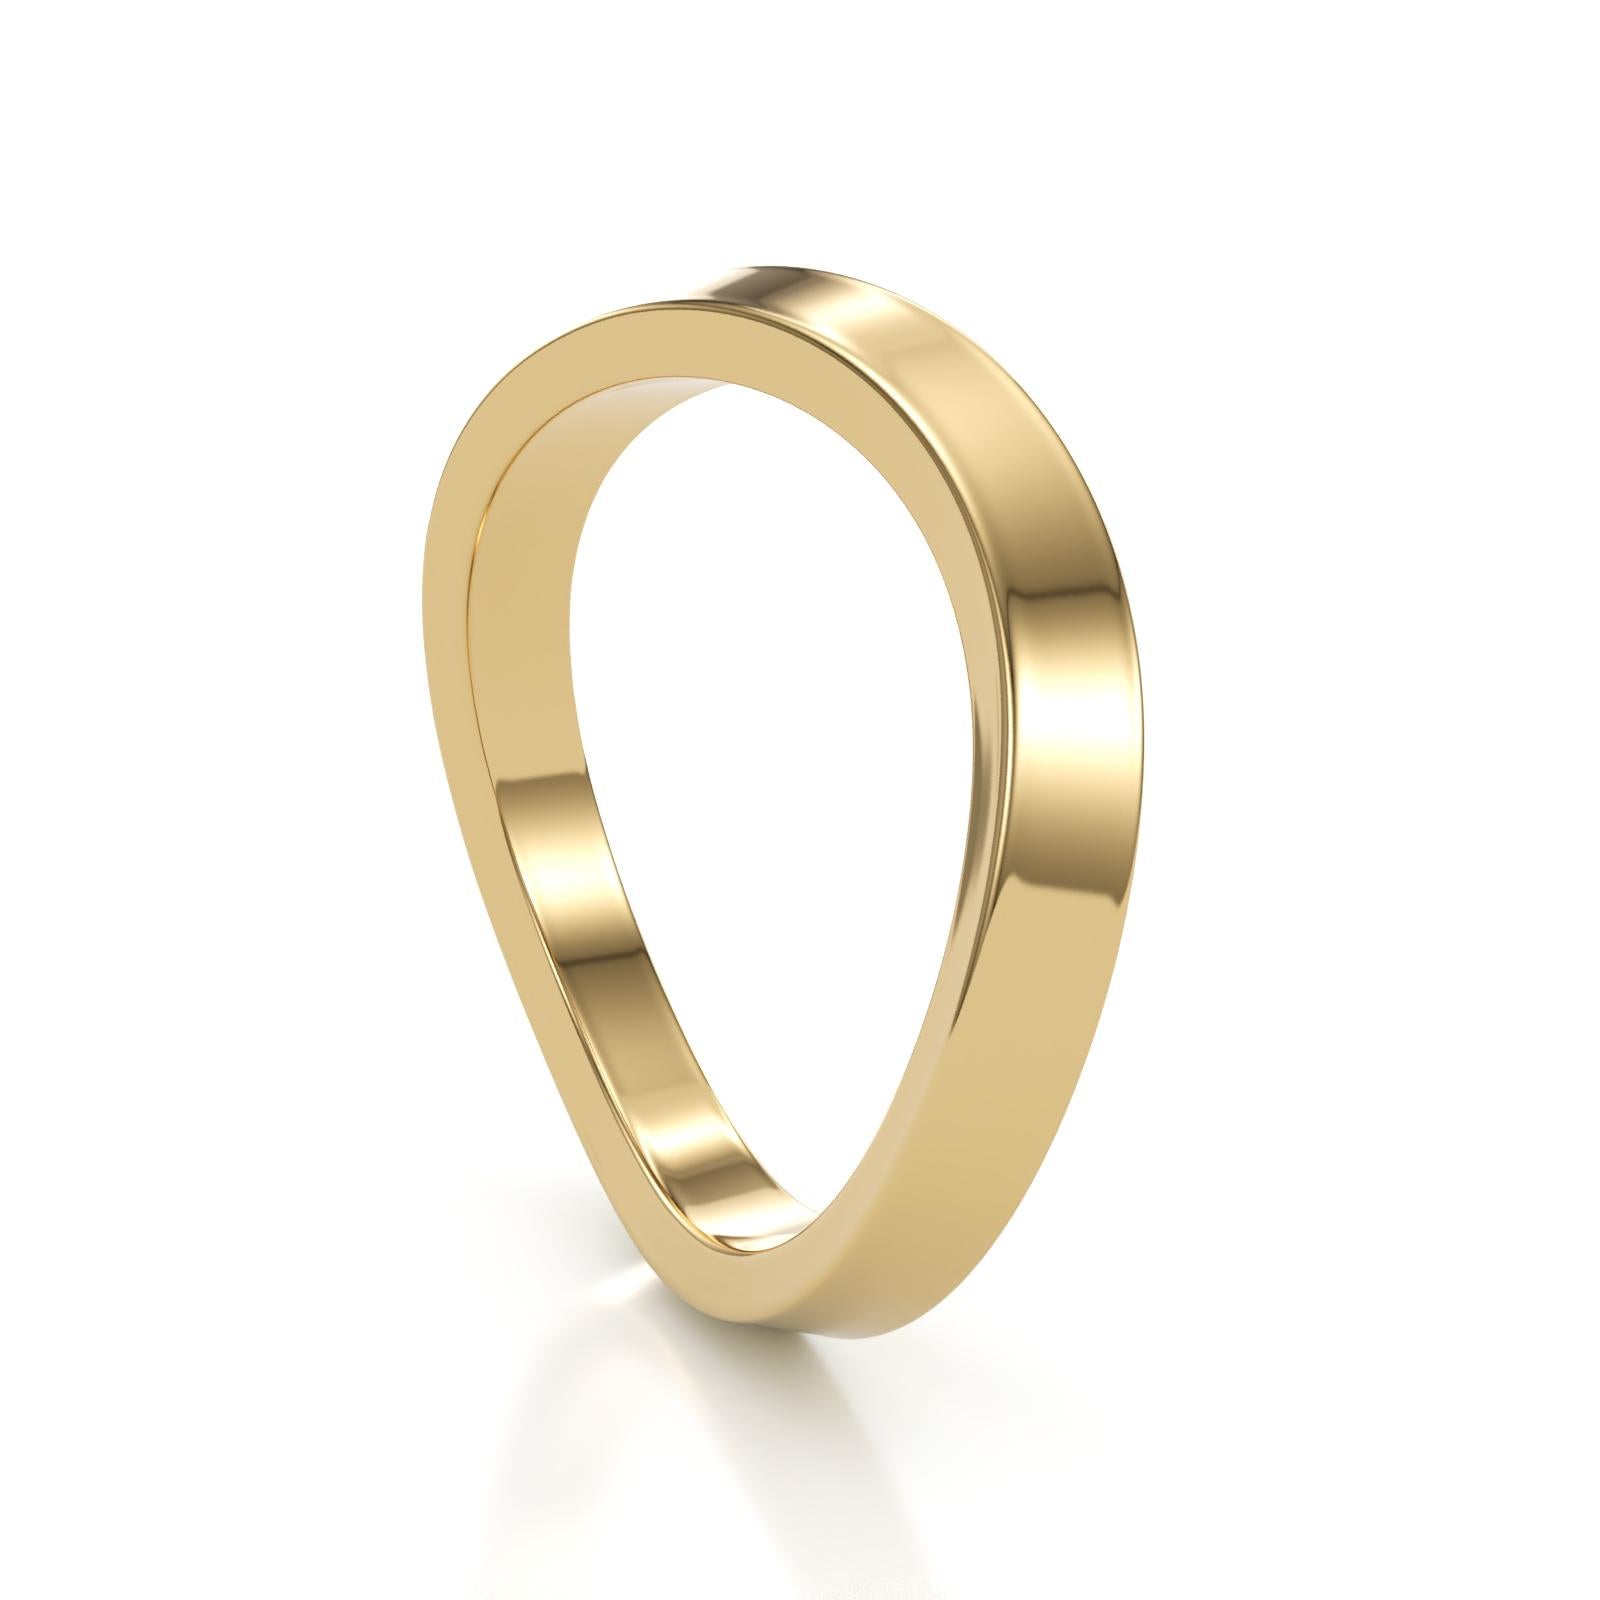 Elevate your jewelry game with this stunning yellow gold ring that stacks perfectly with our Sierra Ring and with itself. Handcrafted in NYC, this ring gently curves along the length of the band making it a great choice for adding an intrigue to